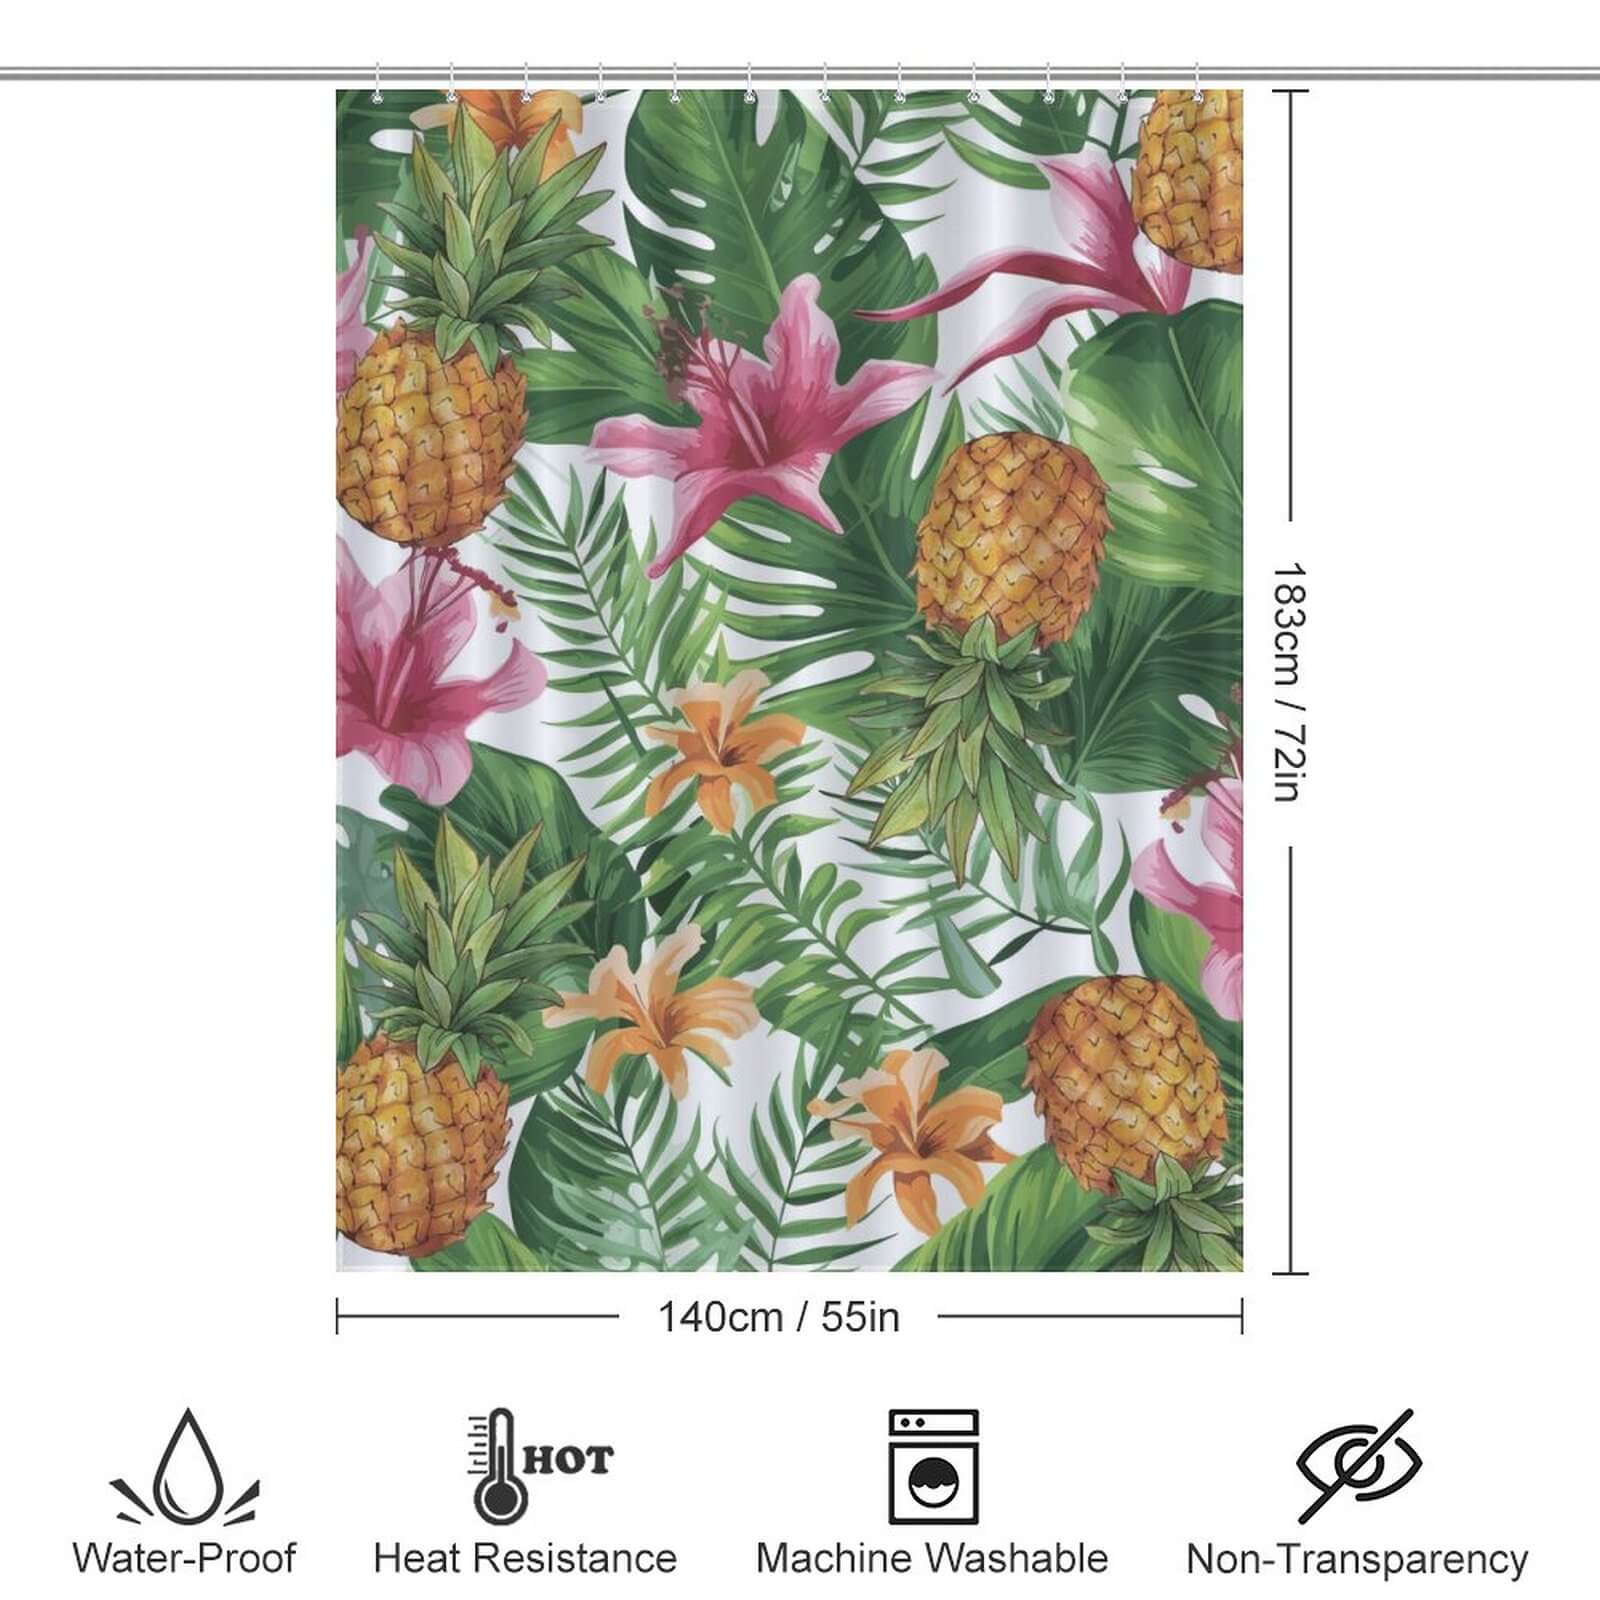 Transform your bathroom into a tropical oasis with this delightful Tropical Pineapple Shower Curtain adorned with lilies. Elevate your bathroom decor with the vibrant colors and cheerful design of this Tropical Pineapple Shower Curtain by Cotton Cat.